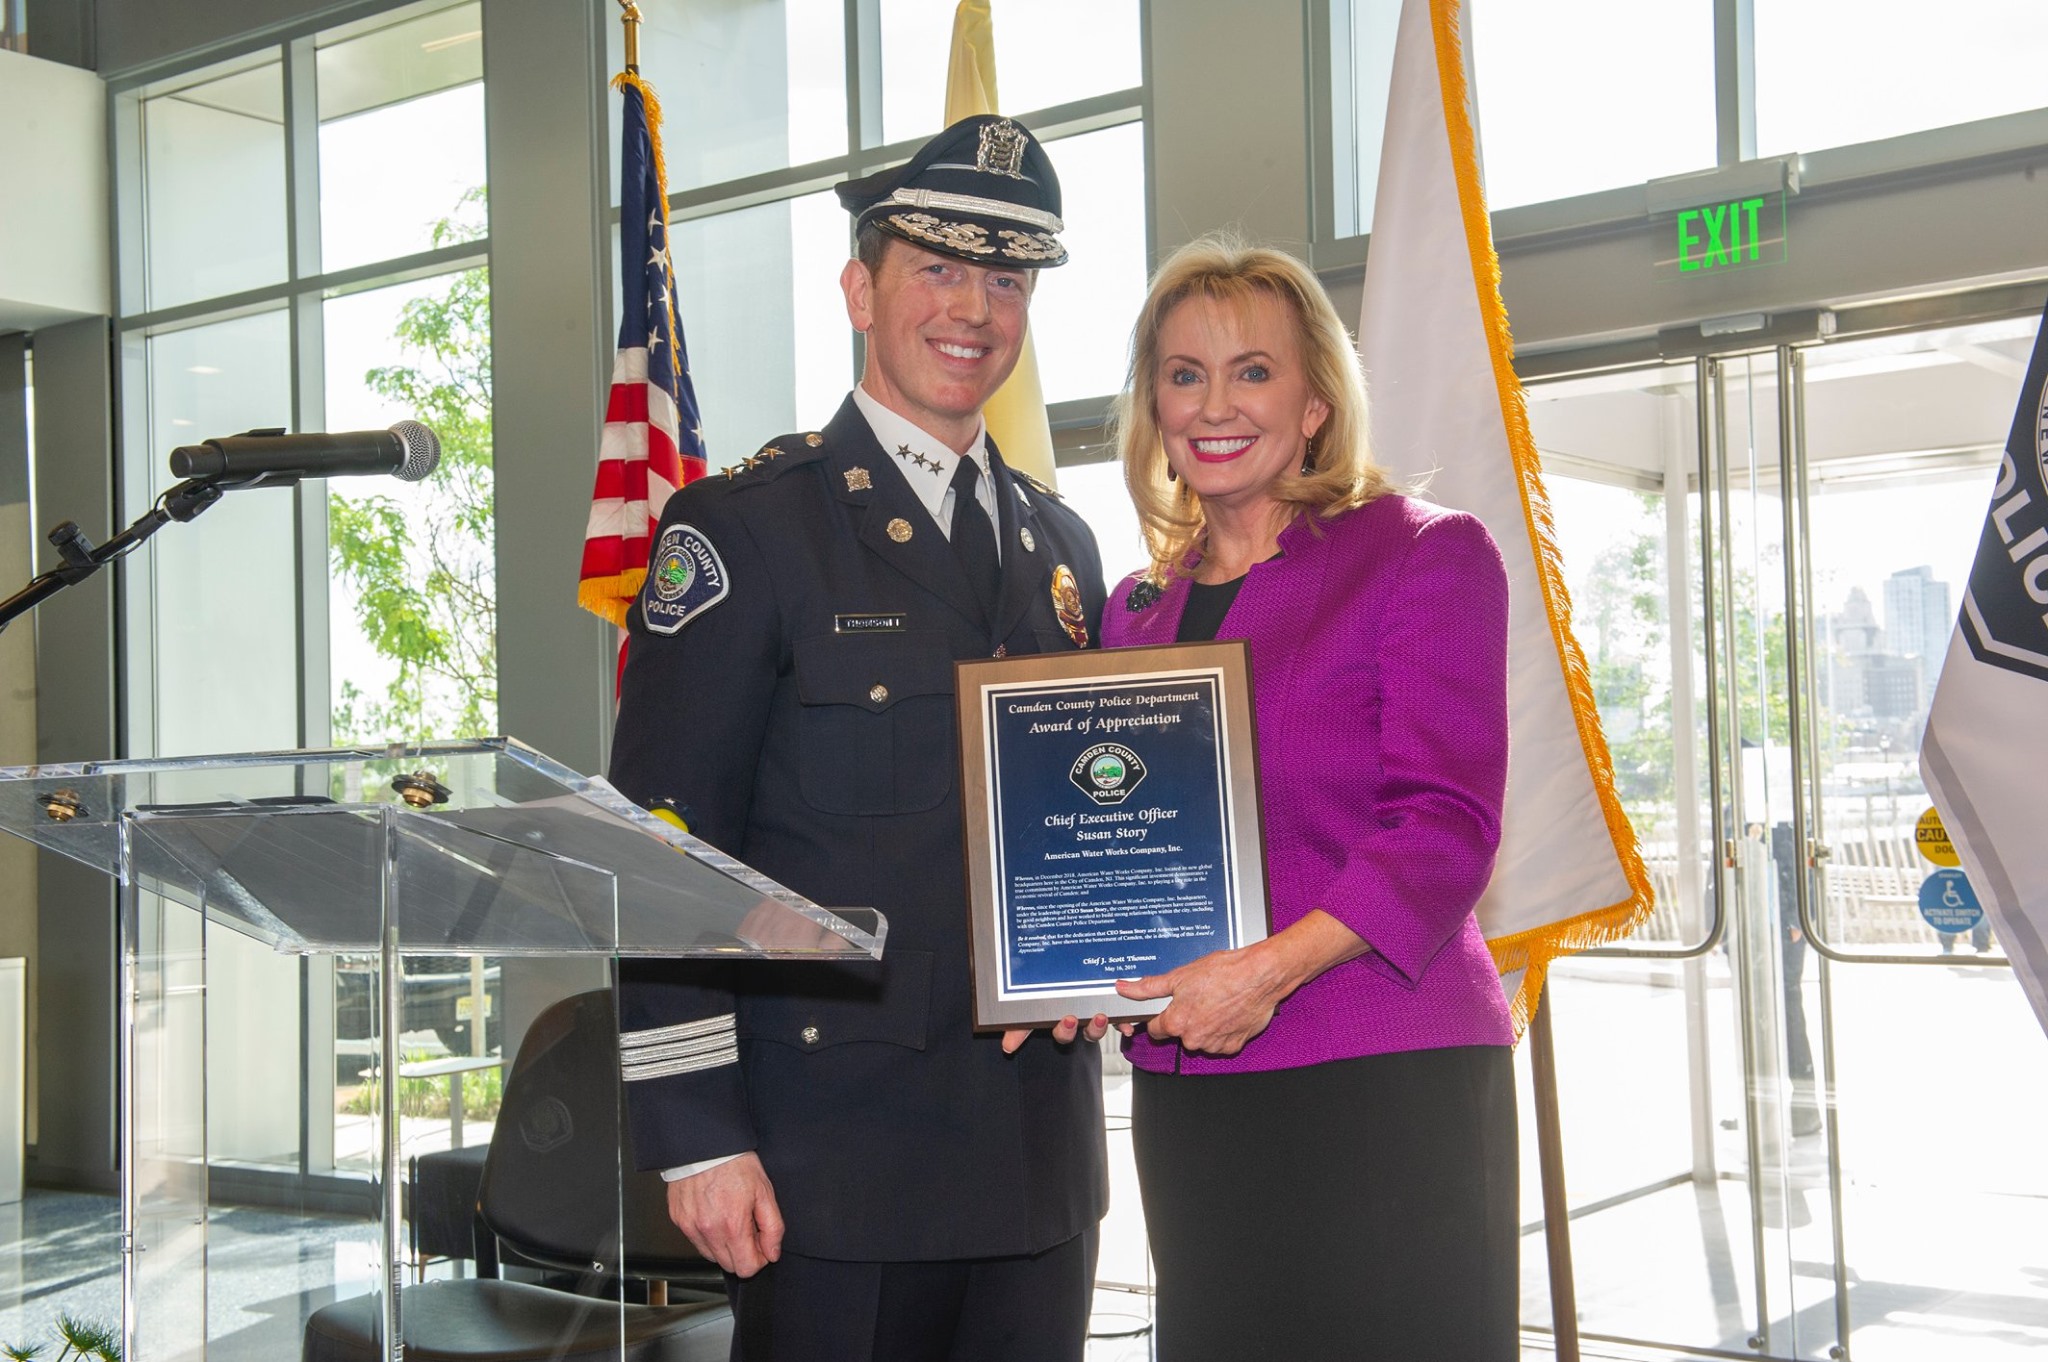 Former CEO Susan Story receives an Award of Appreciation from the local Police Department for American Water and the American Water Charitable Foundation's generous donation.